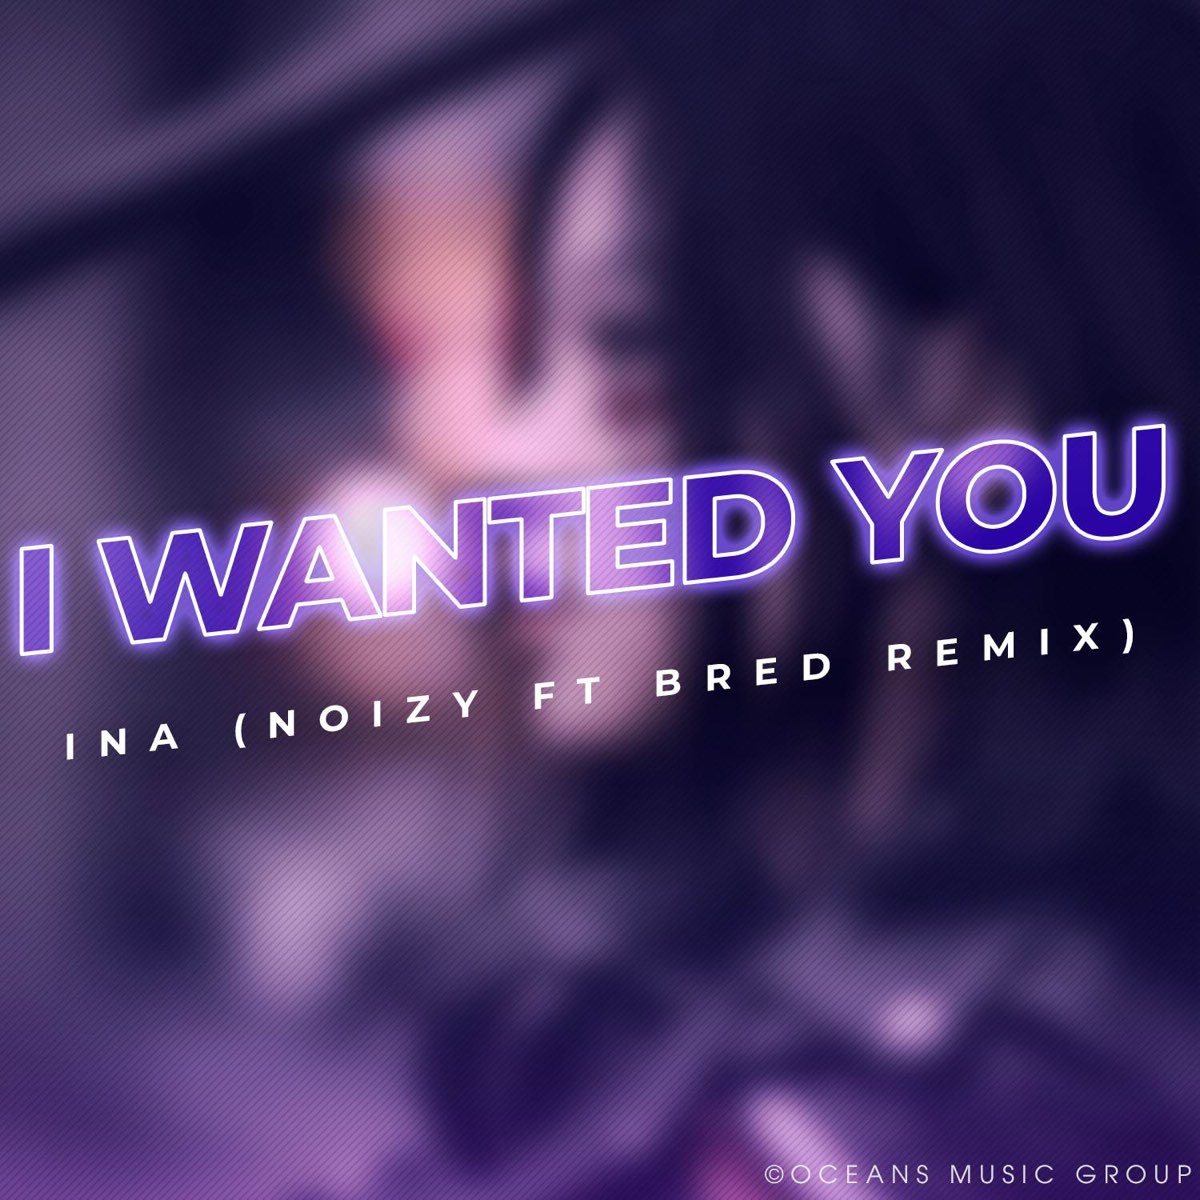 Ina ft. featuring Noizy & BRED I Wanted You (Remix) cover artwork